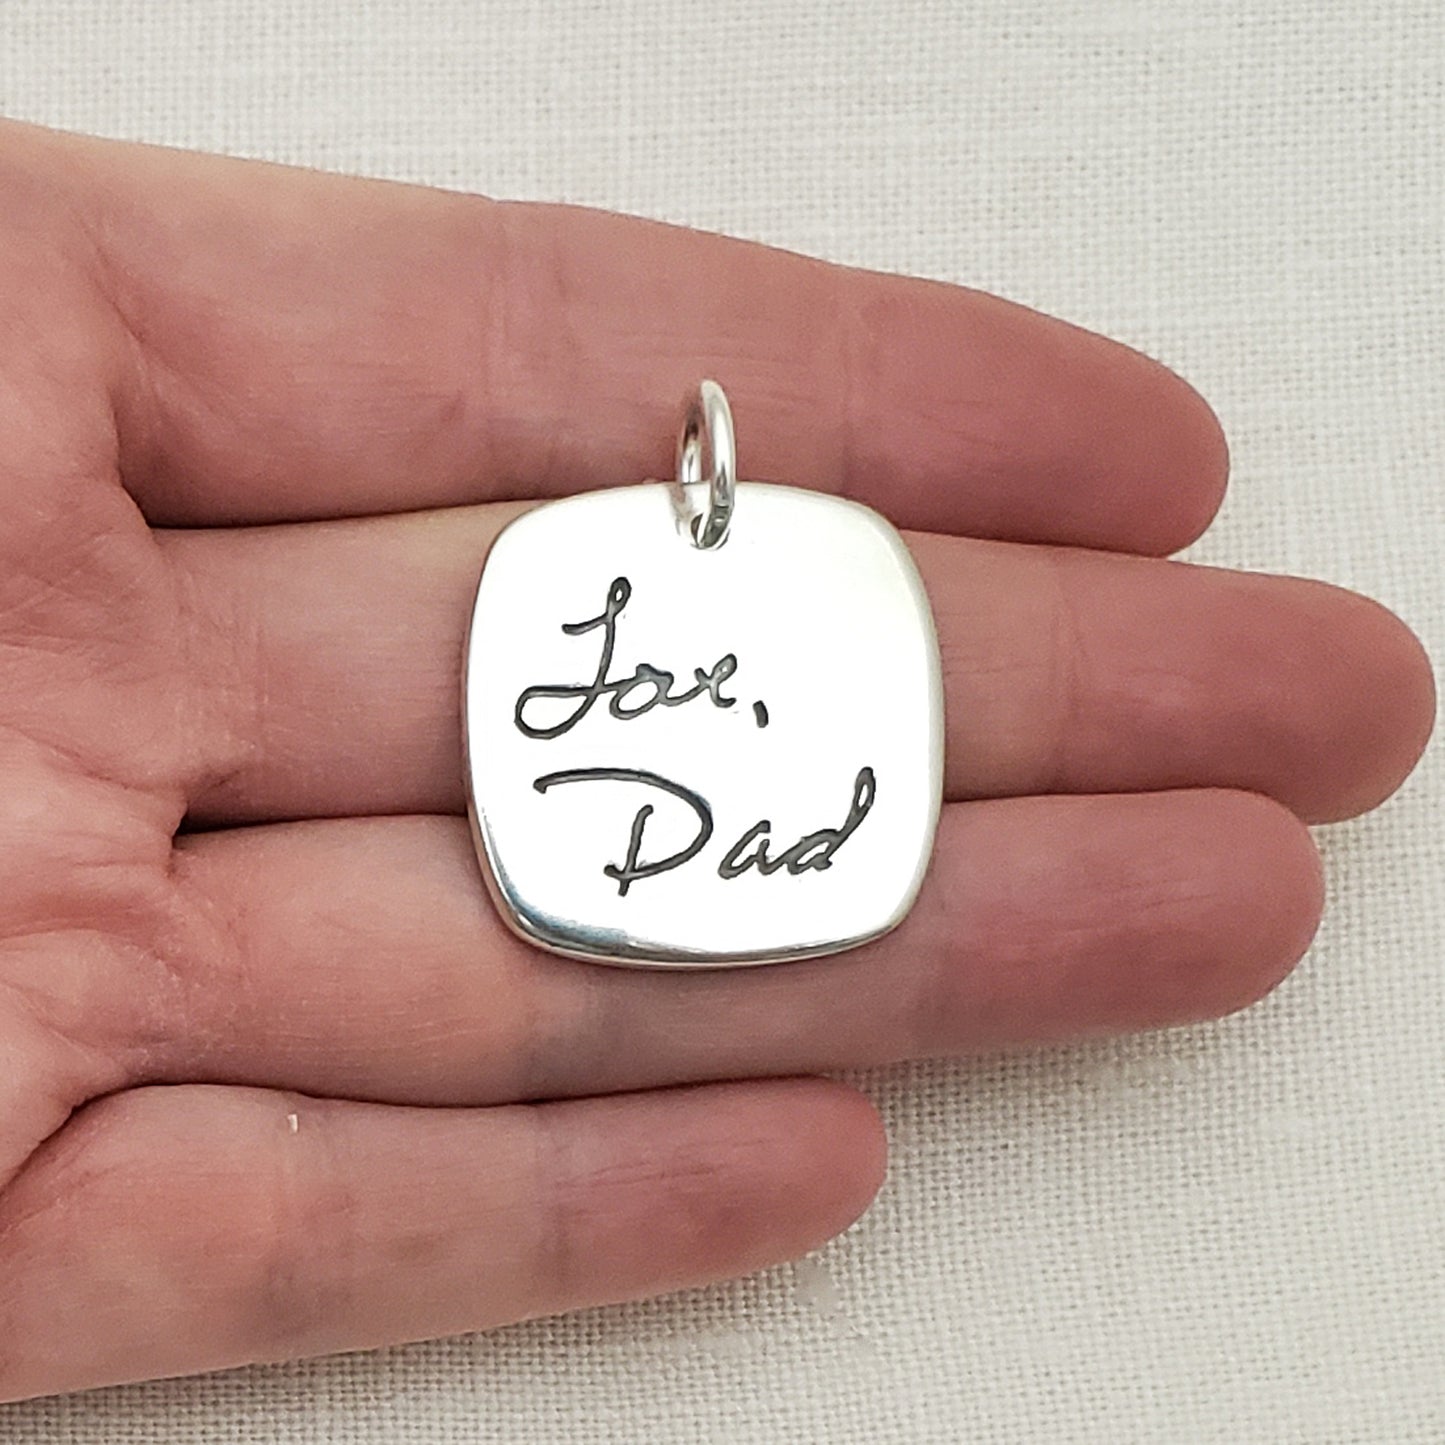 Handwriting Rounded Square Pendant